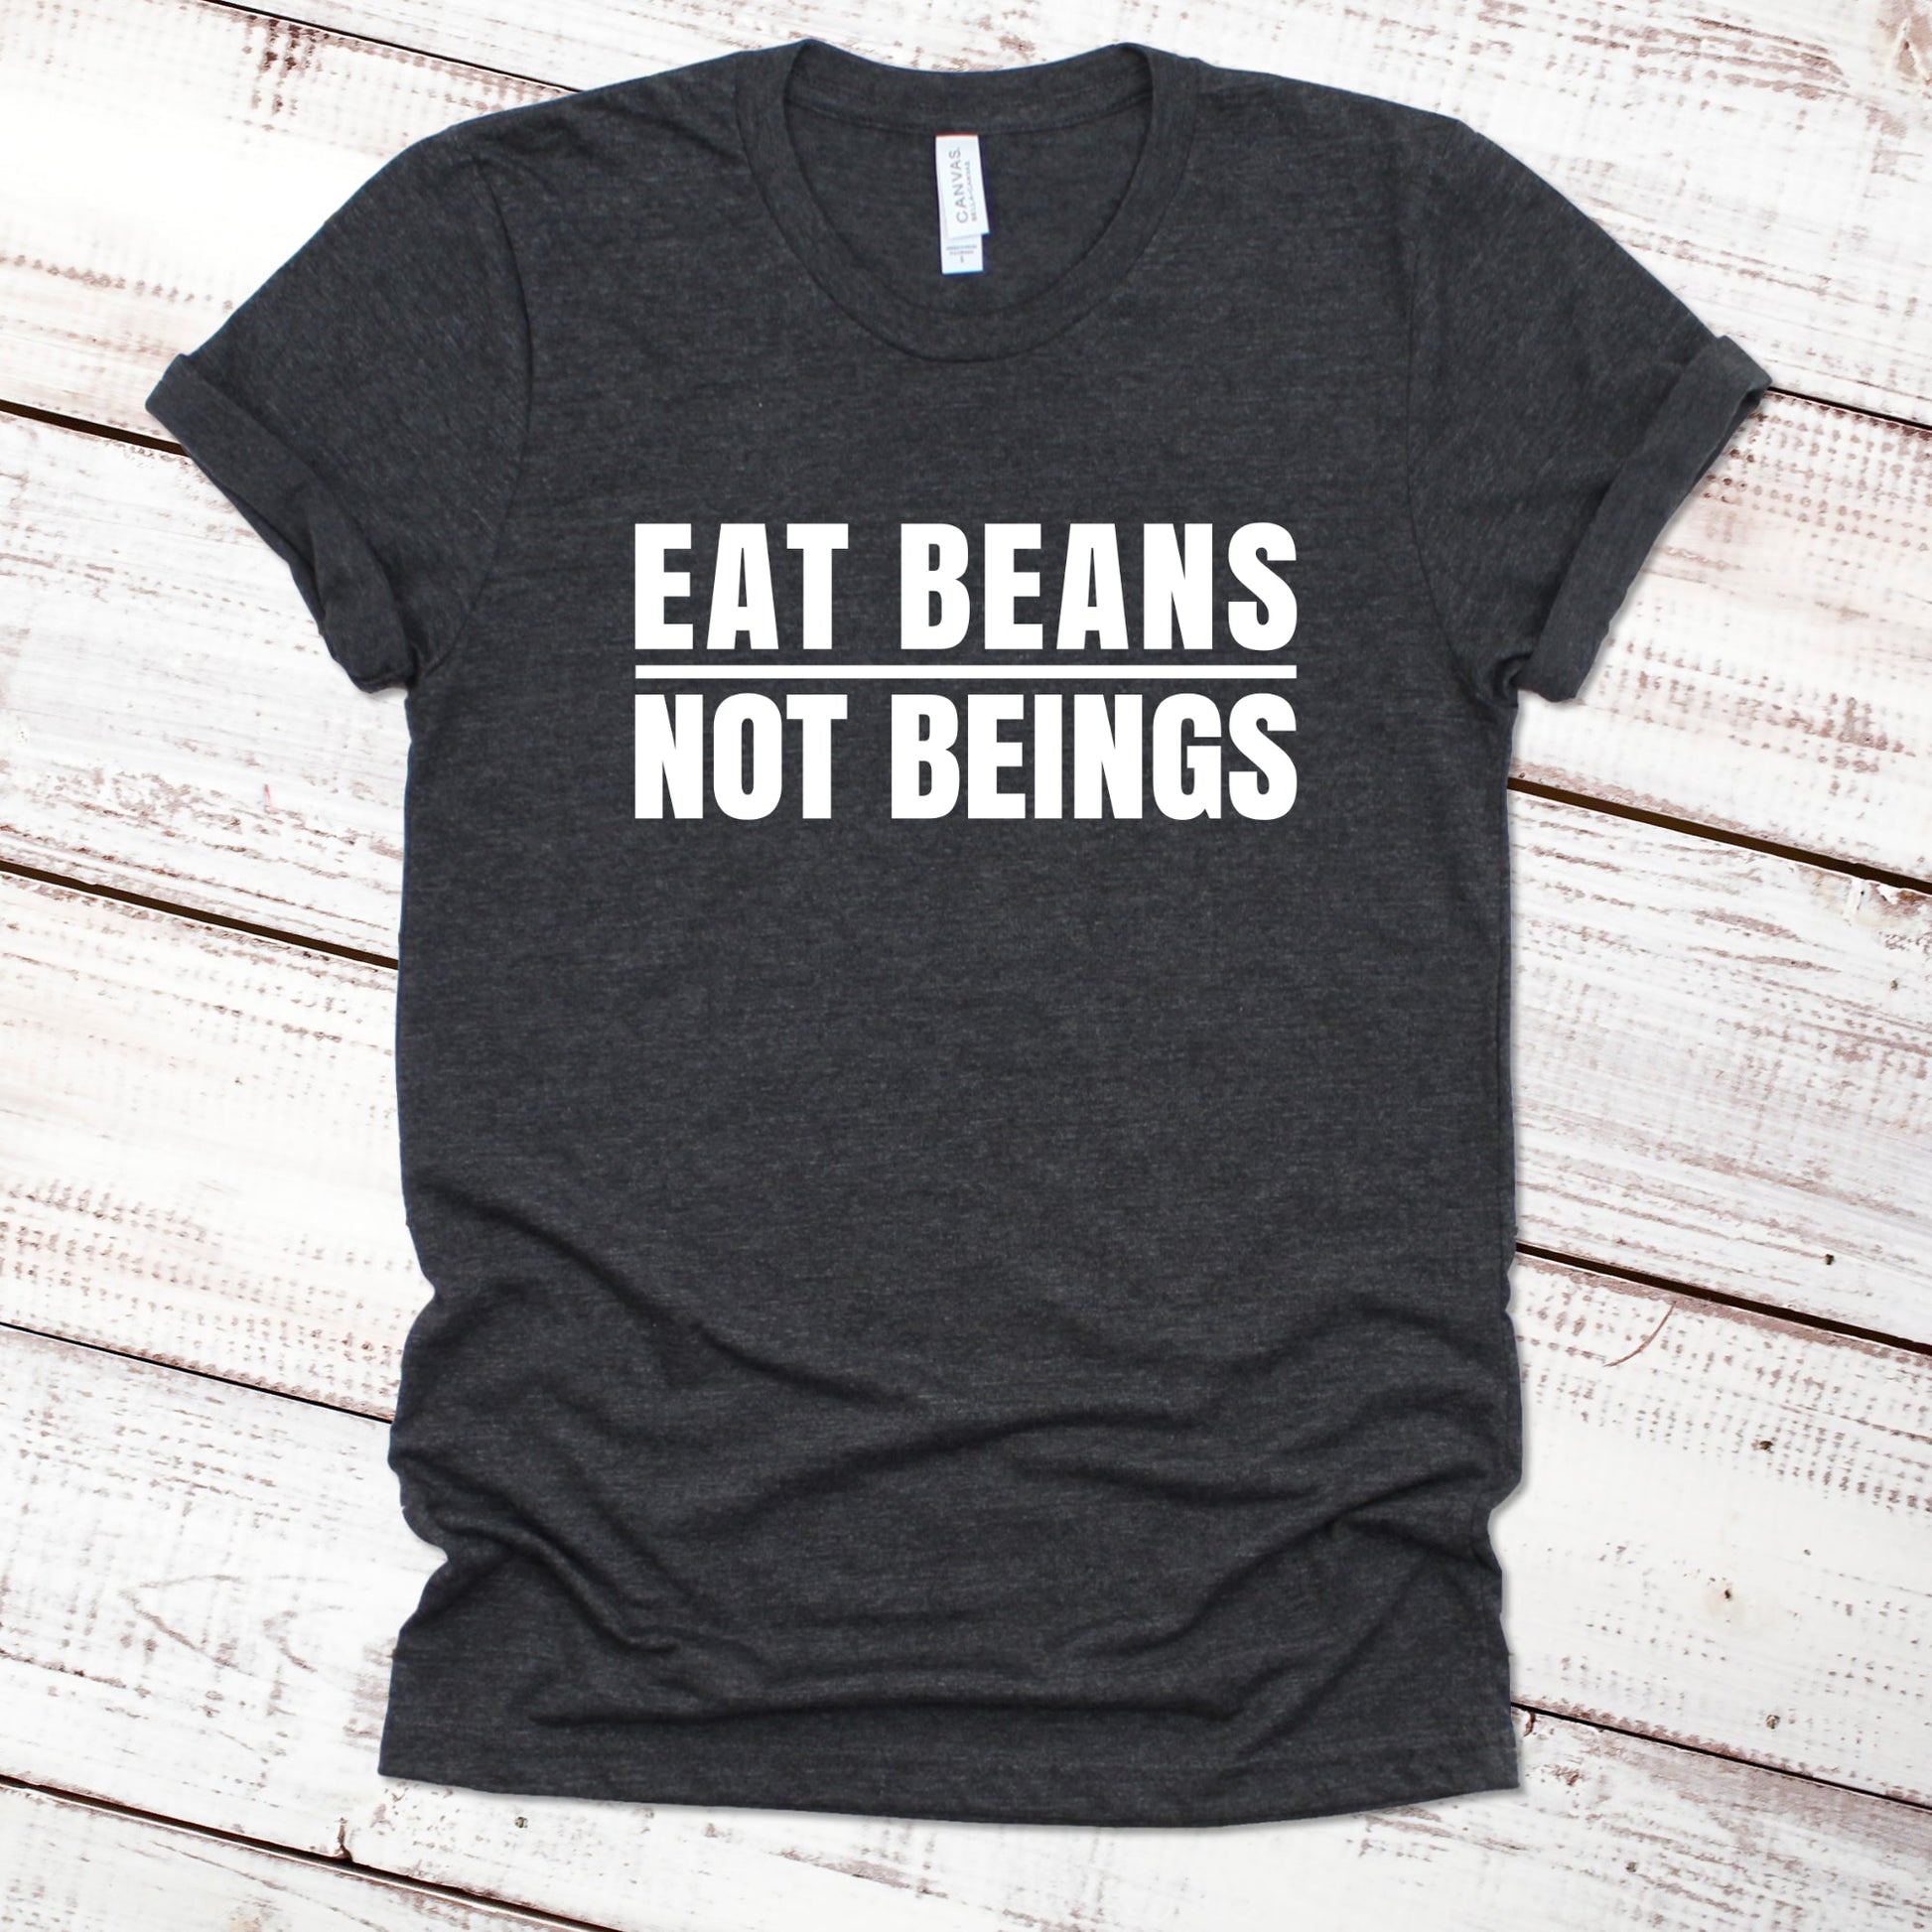 Eat Beans Not Beings Funny Shirt Great Giftables Dark Gray Heather XS 